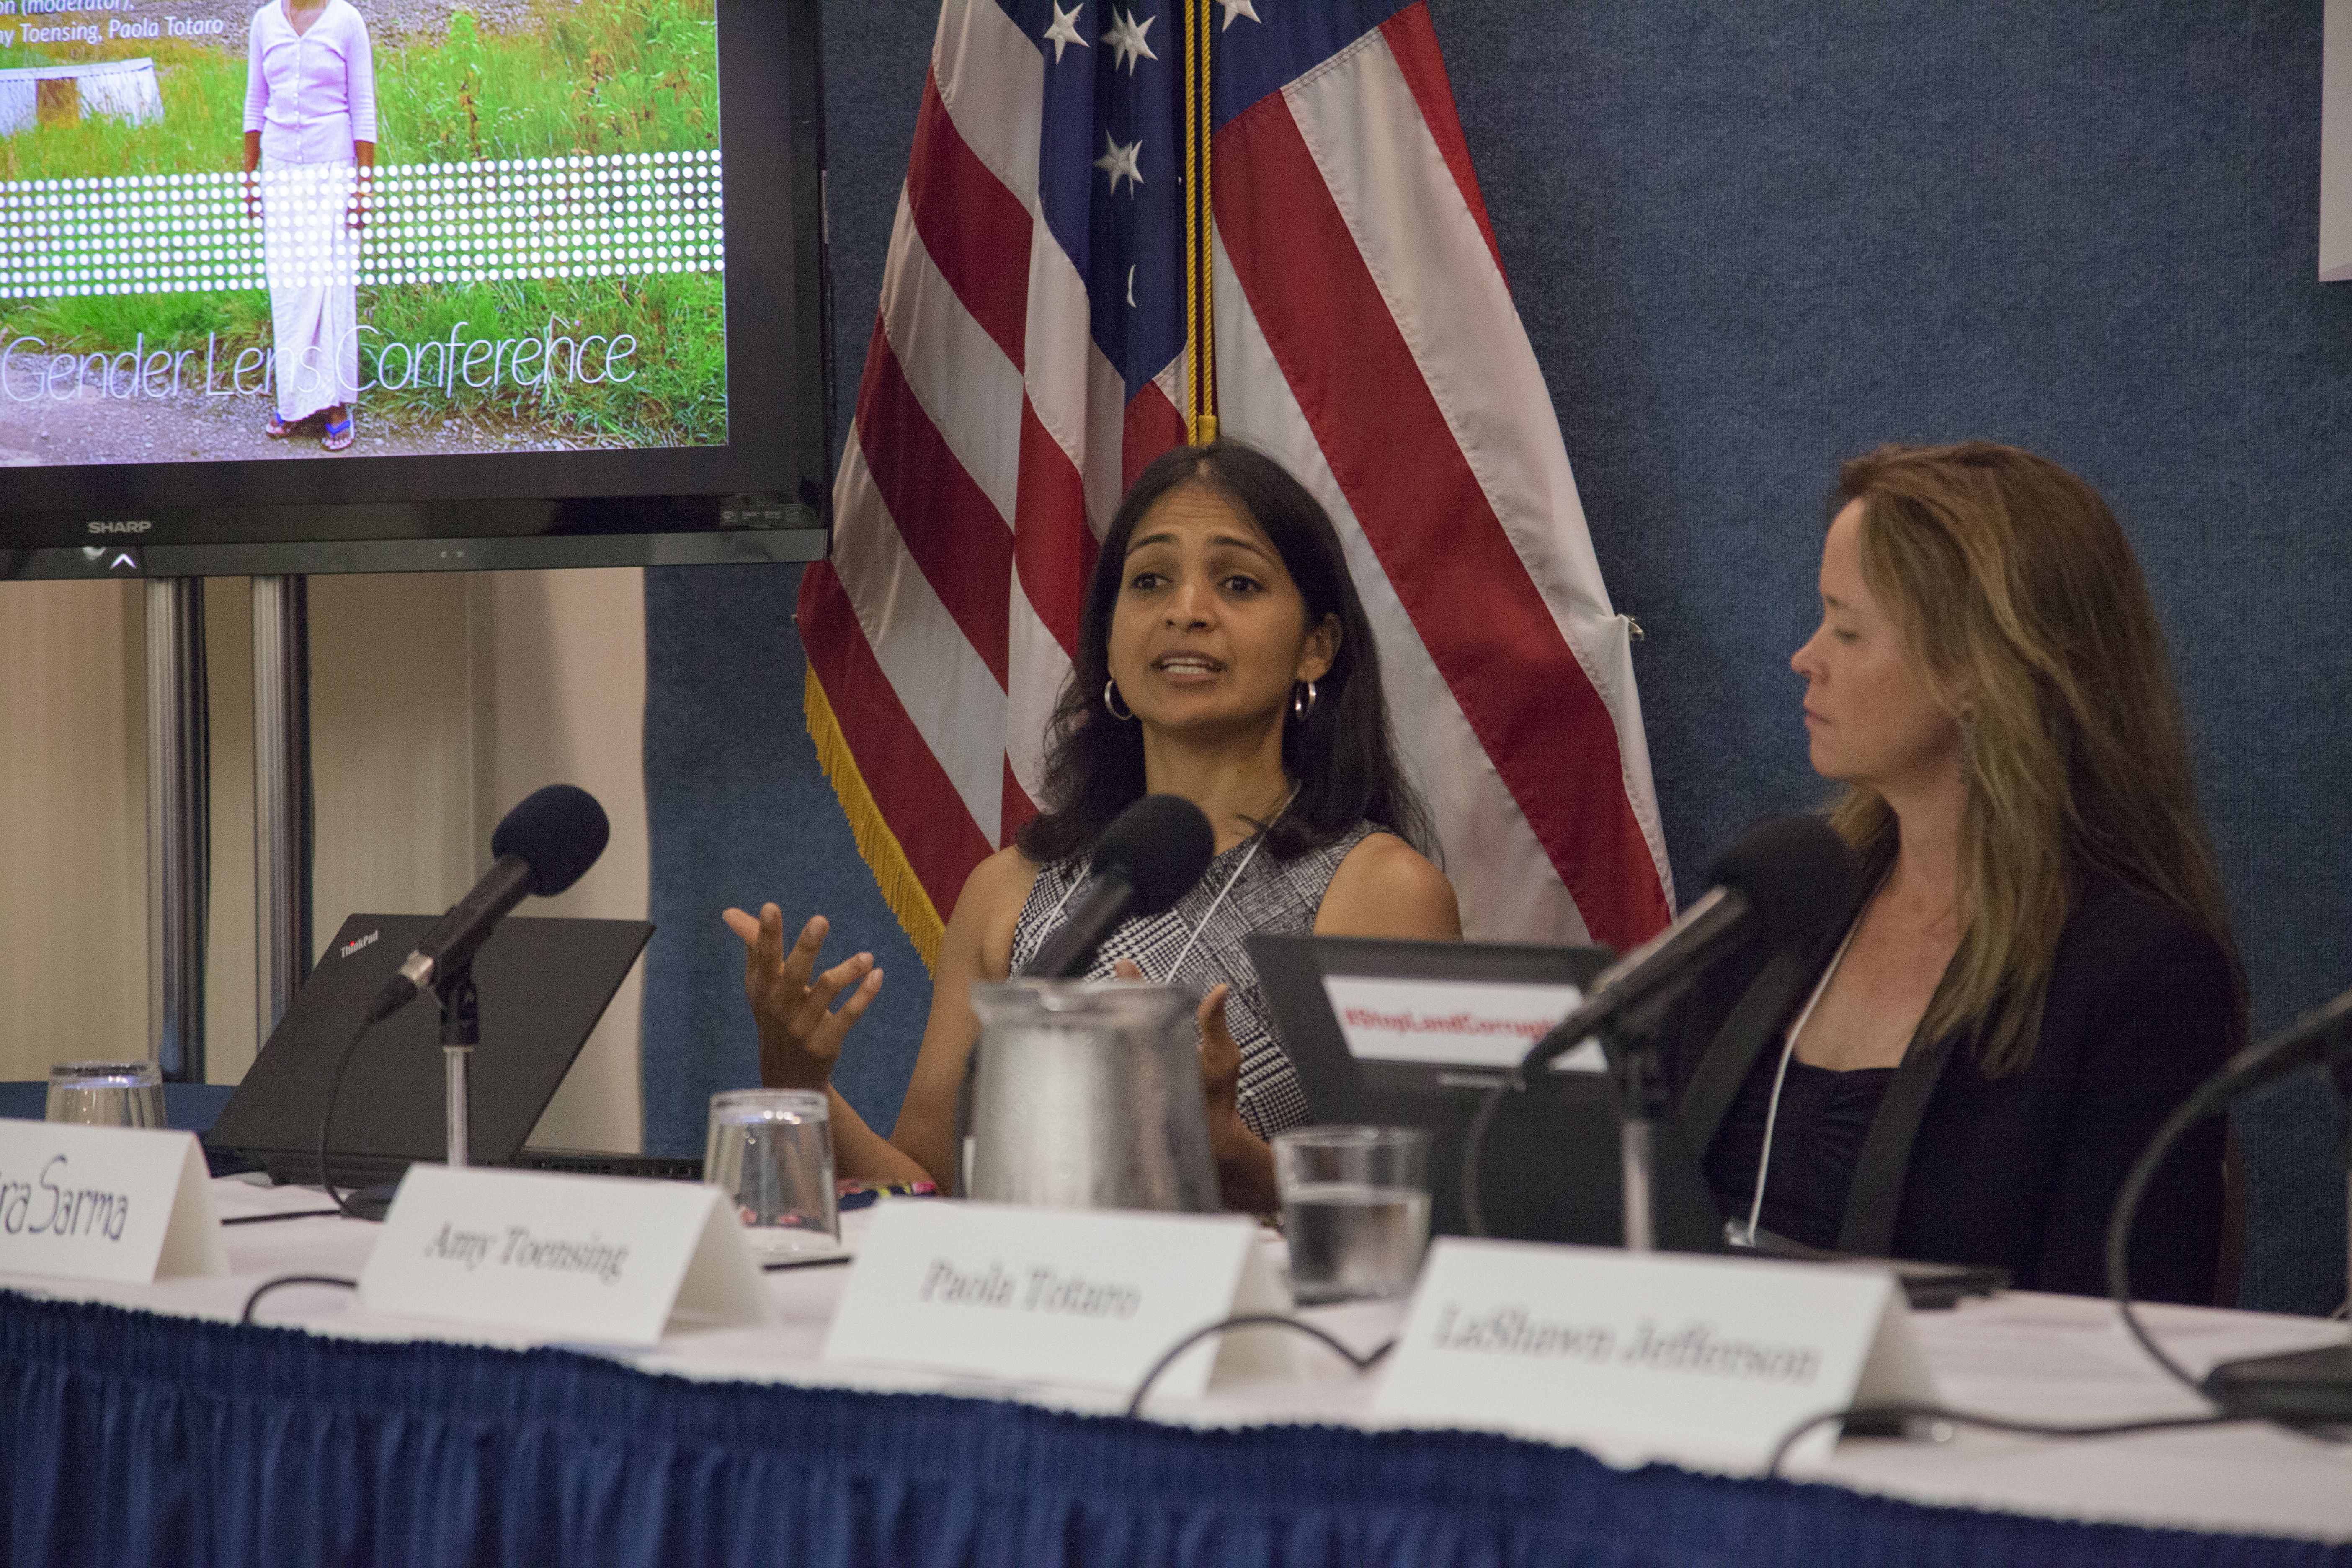 Gender Lens Property Rights panelist Indira Sarma talks about her work at Namati, an organization that helps widows gain legal representation and expertise to fight for their rights. Image by Jin Ding. United States, 2017.